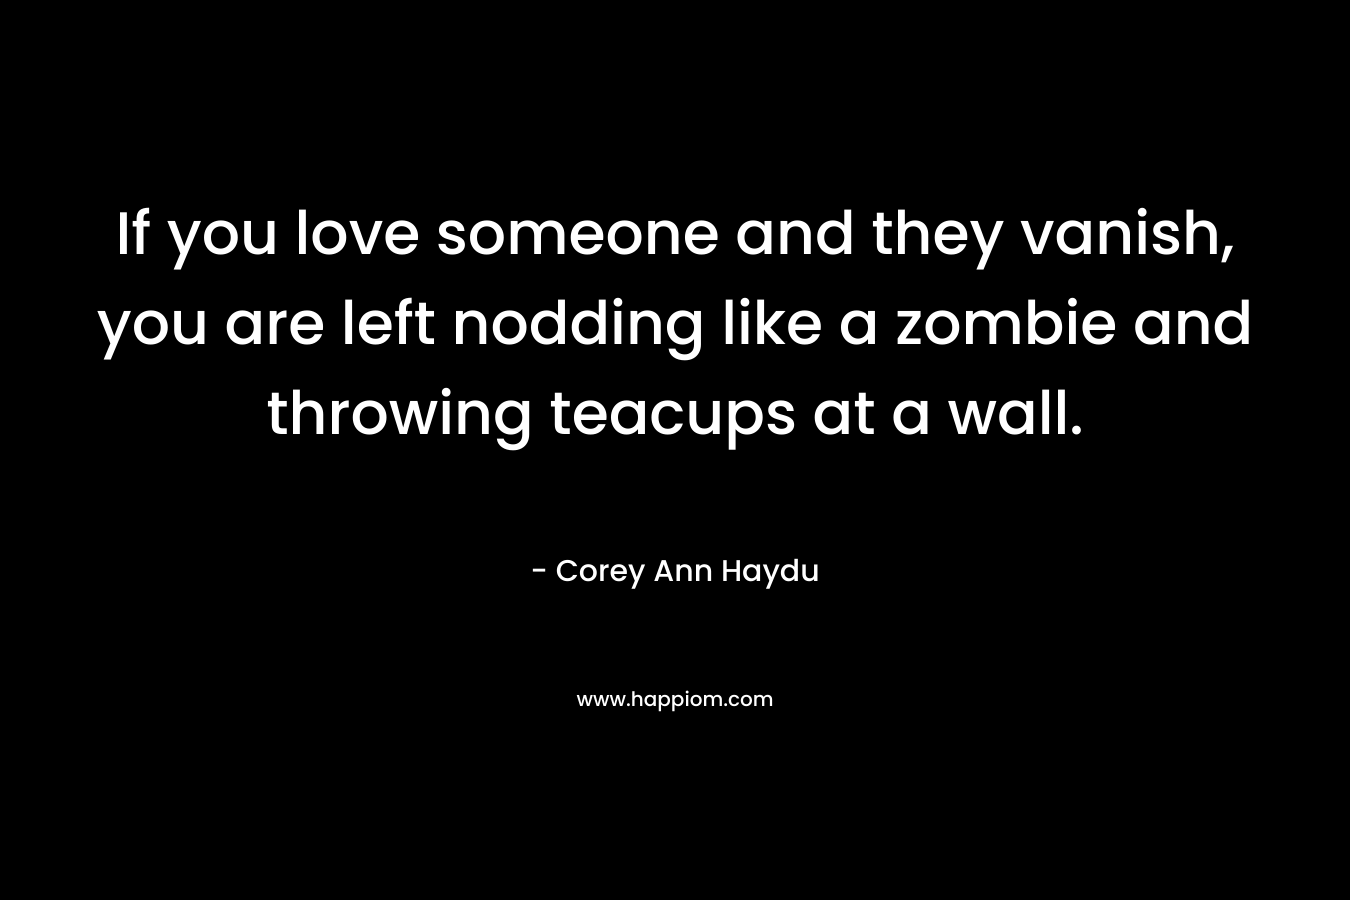 If you love someone and they vanish, you are left nodding like a zombie and throwing teacups at a wall. – Corey Ann Haydu